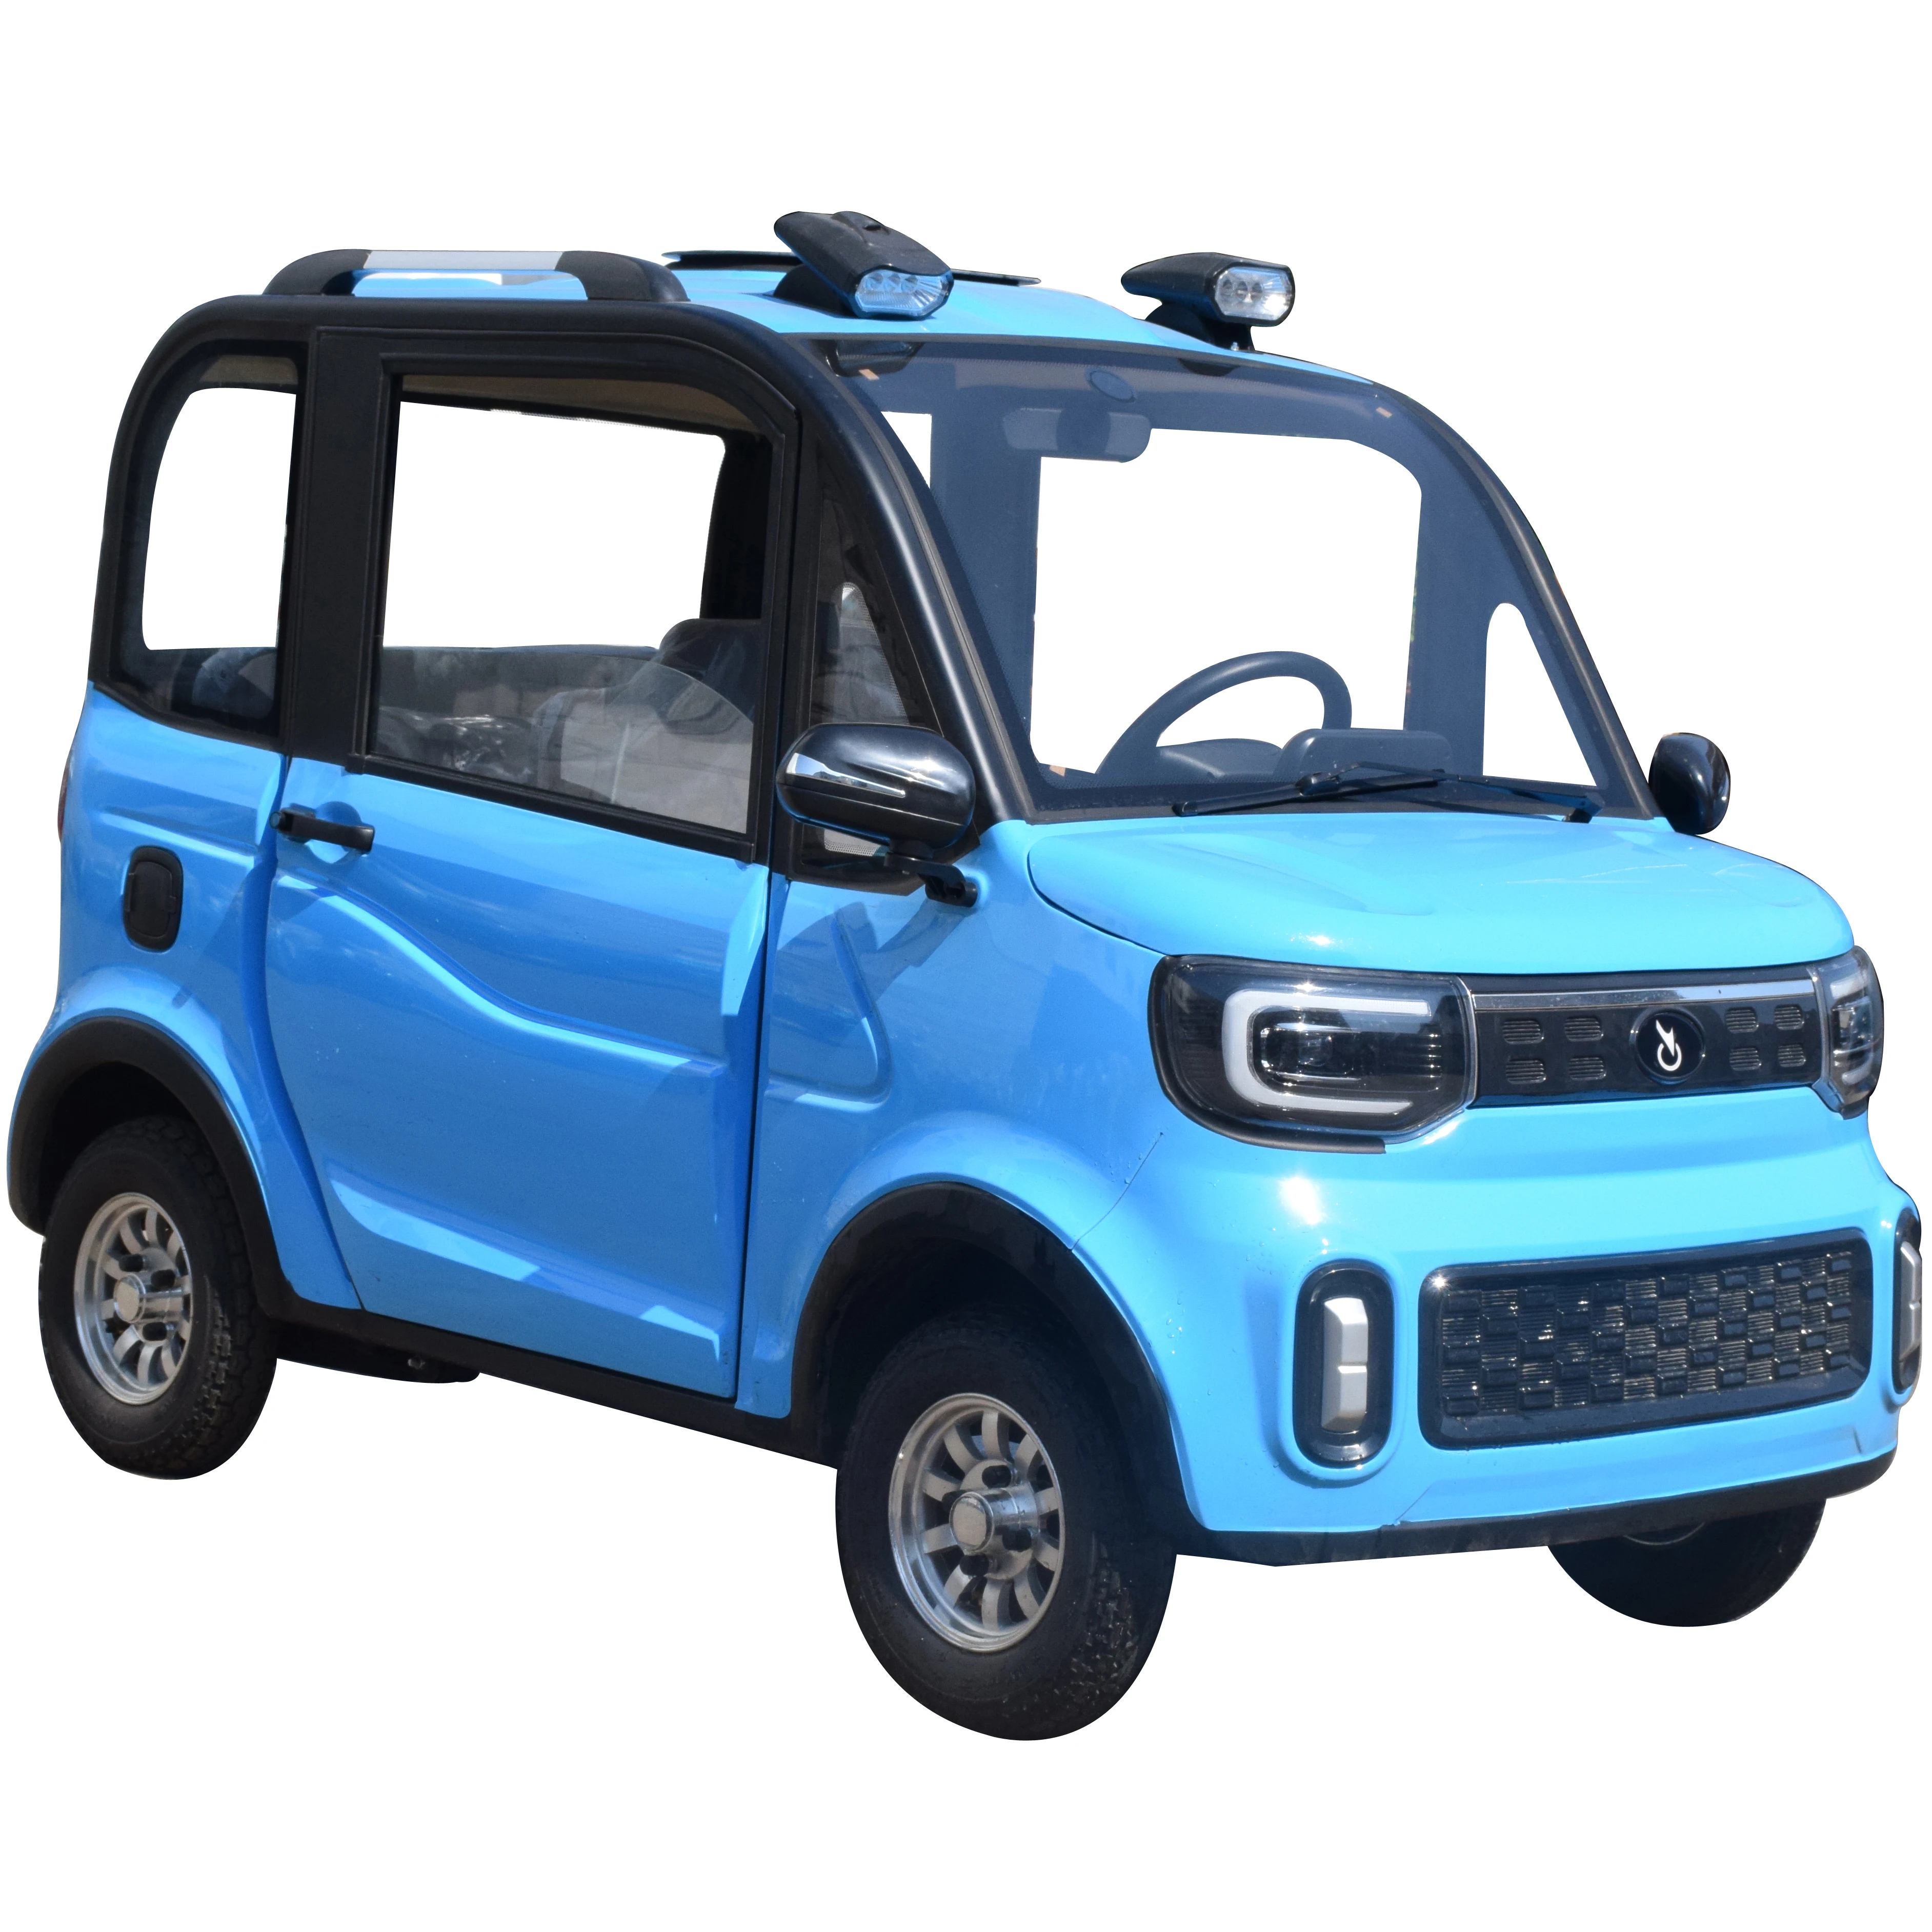 

changli electric car 3 seats closed cabin in China electric vehicle Four wheels adult auto motives mini car chang li zyx